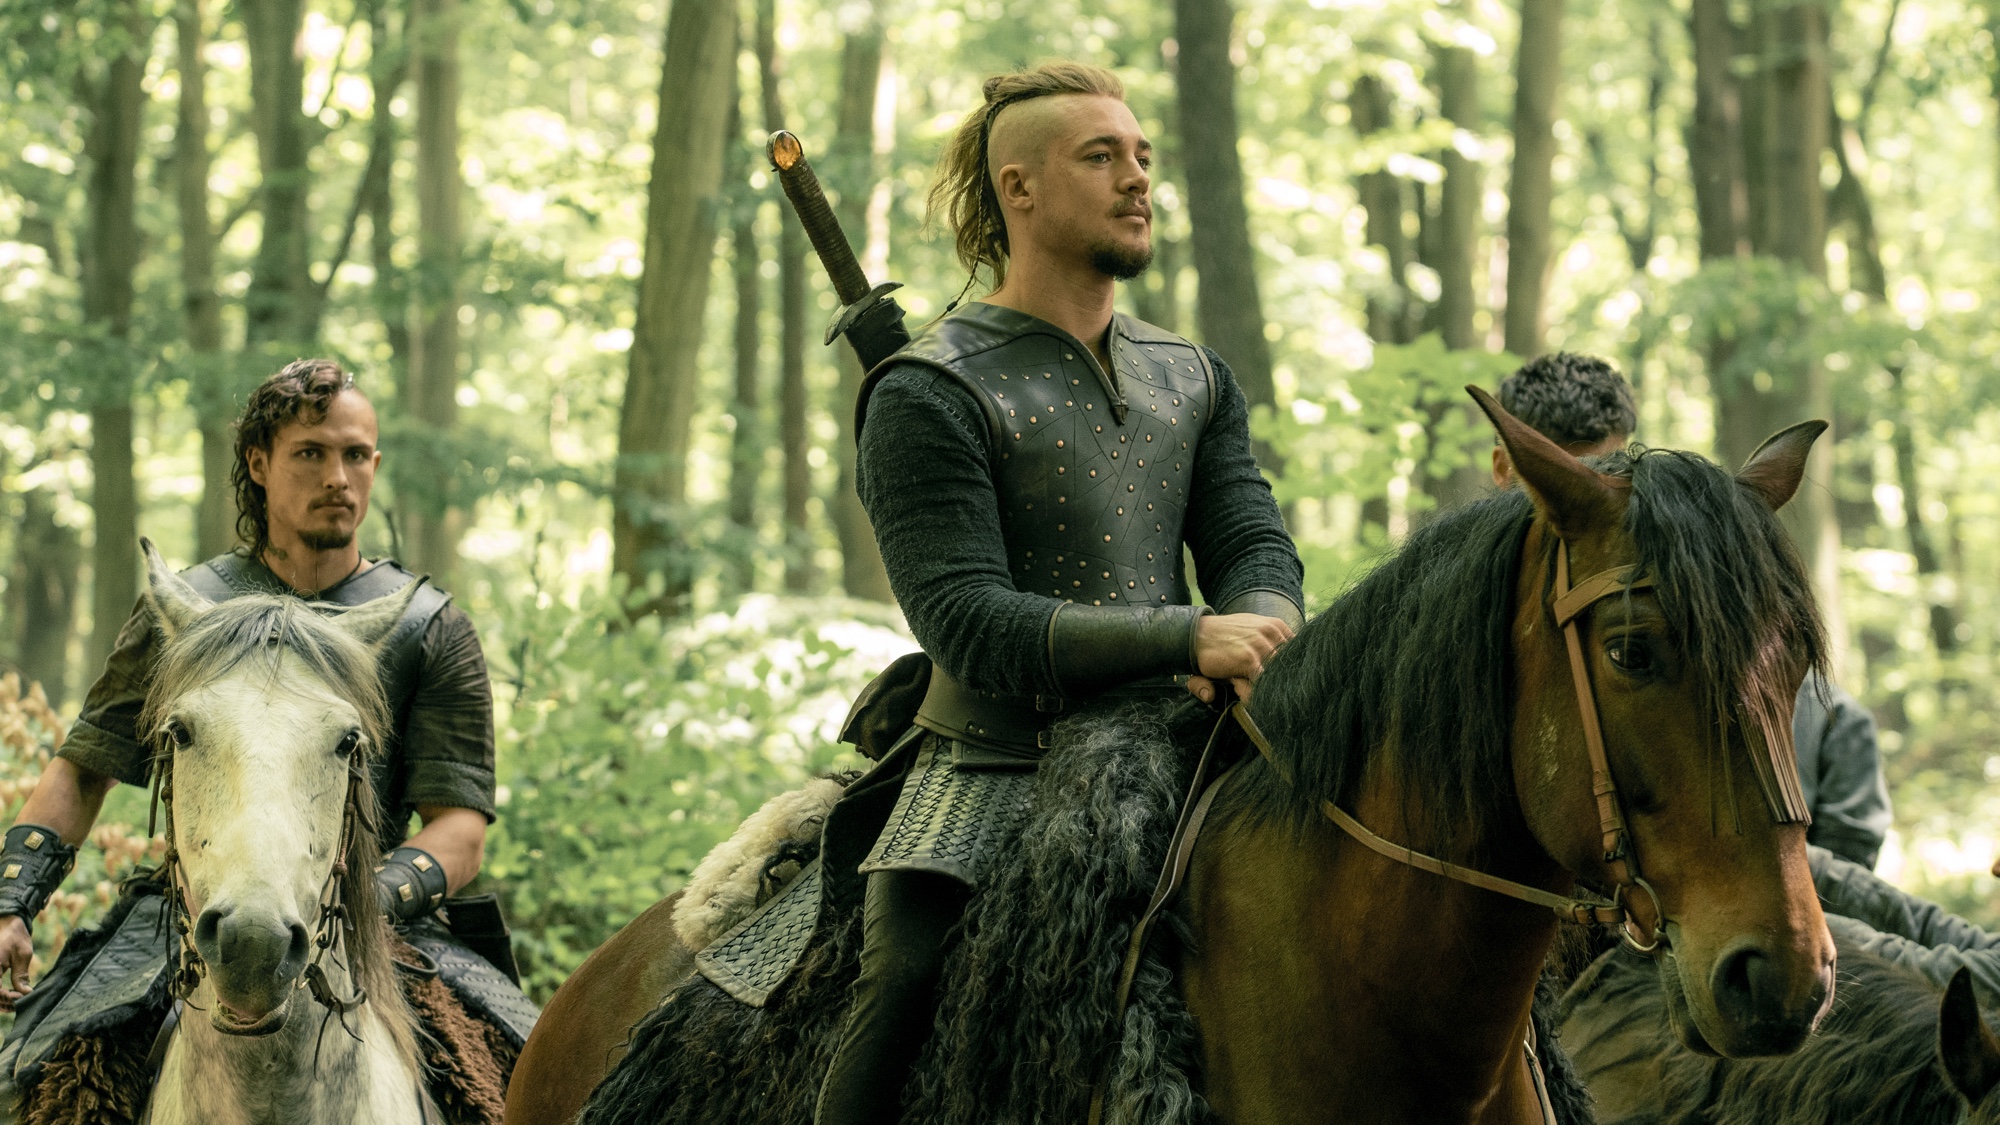 Aenas Fedaravicius as Sihtric and Alexander Dreymon as Uhtred in The Last Kingdom